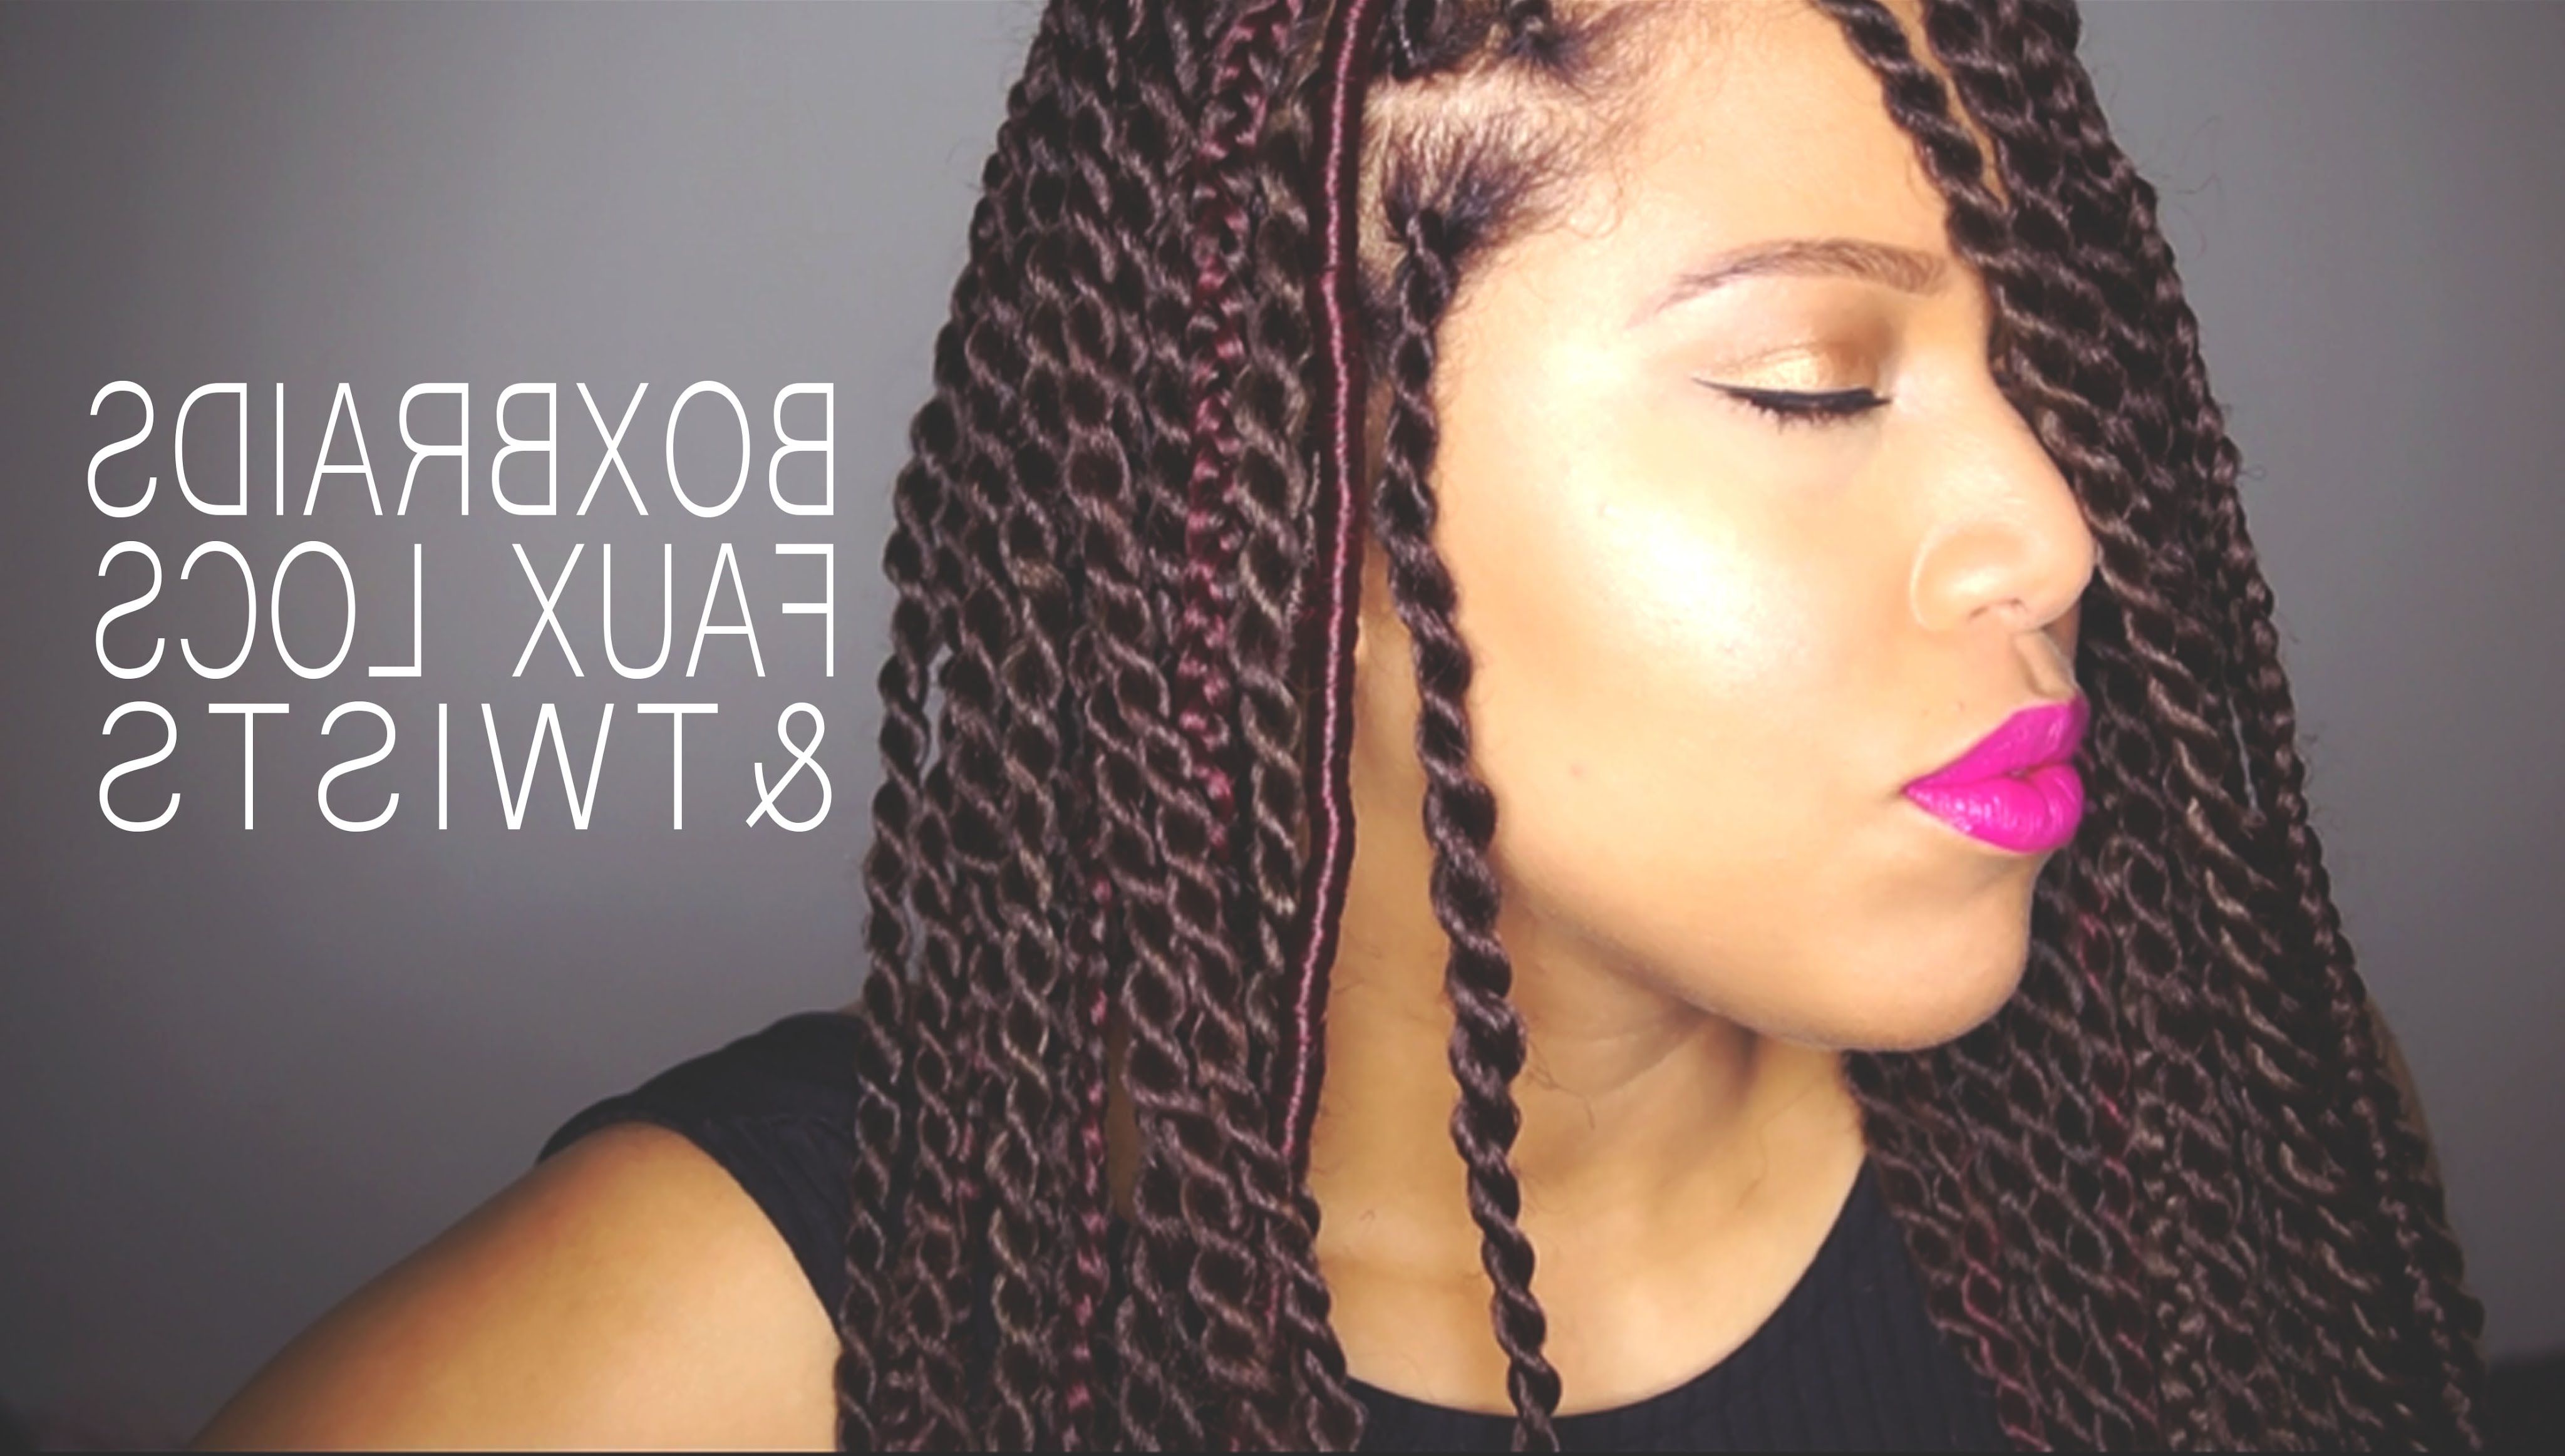 Well Known Twist From Box Braids Hairstyles Inside How To Box Braids / Faux Locs & Twists On Natural Hair // Samantha (View 1 of 15)